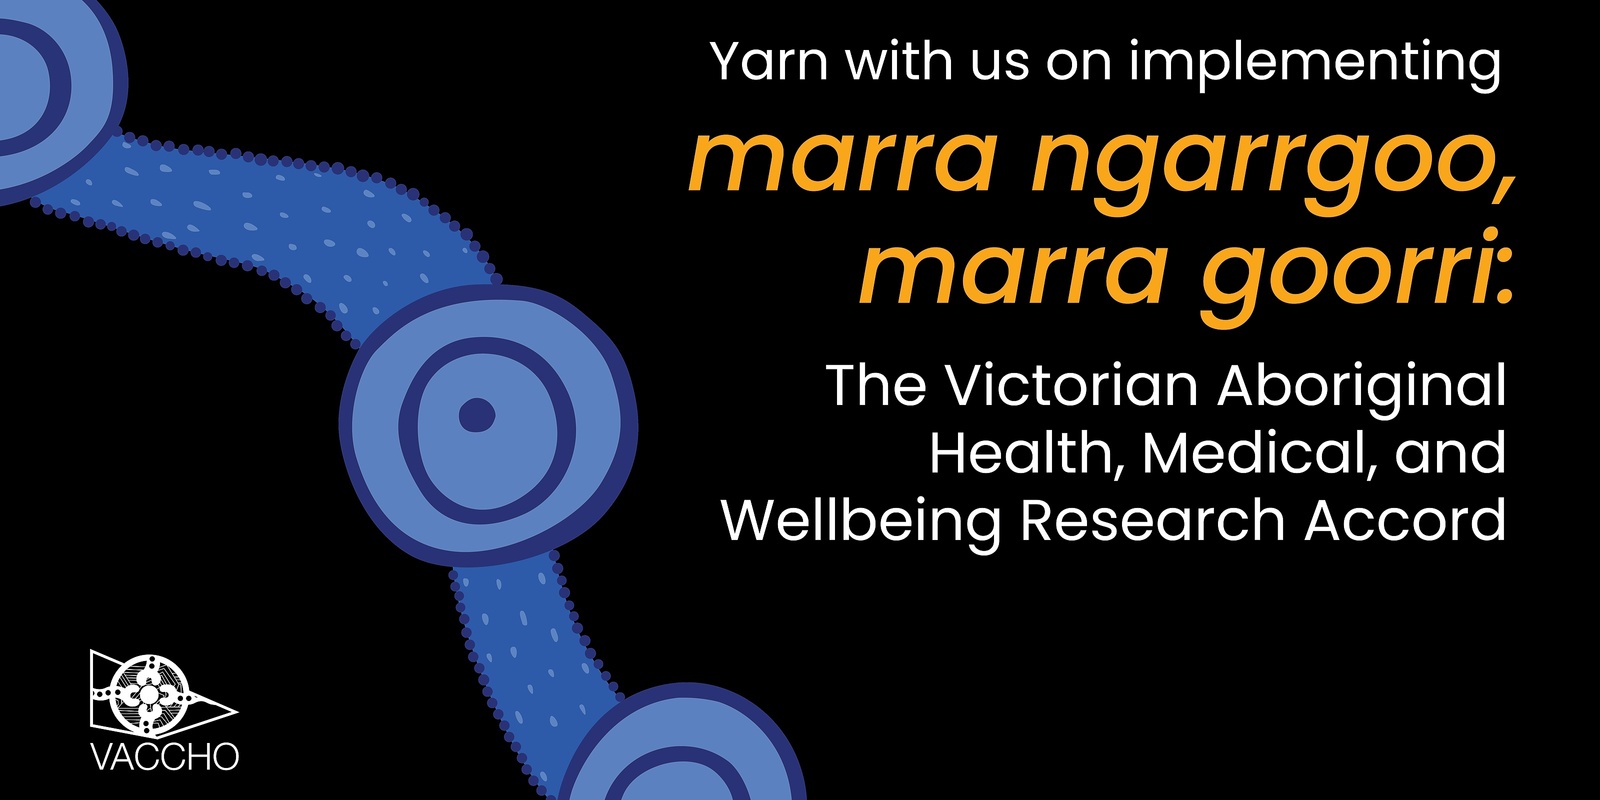 Banner image for Yarn with us on implementing marra ngarrgoo, marra goorri: The Aboriginal Health, Medical and Wellbeing Research Accord - Accreditation Scheme